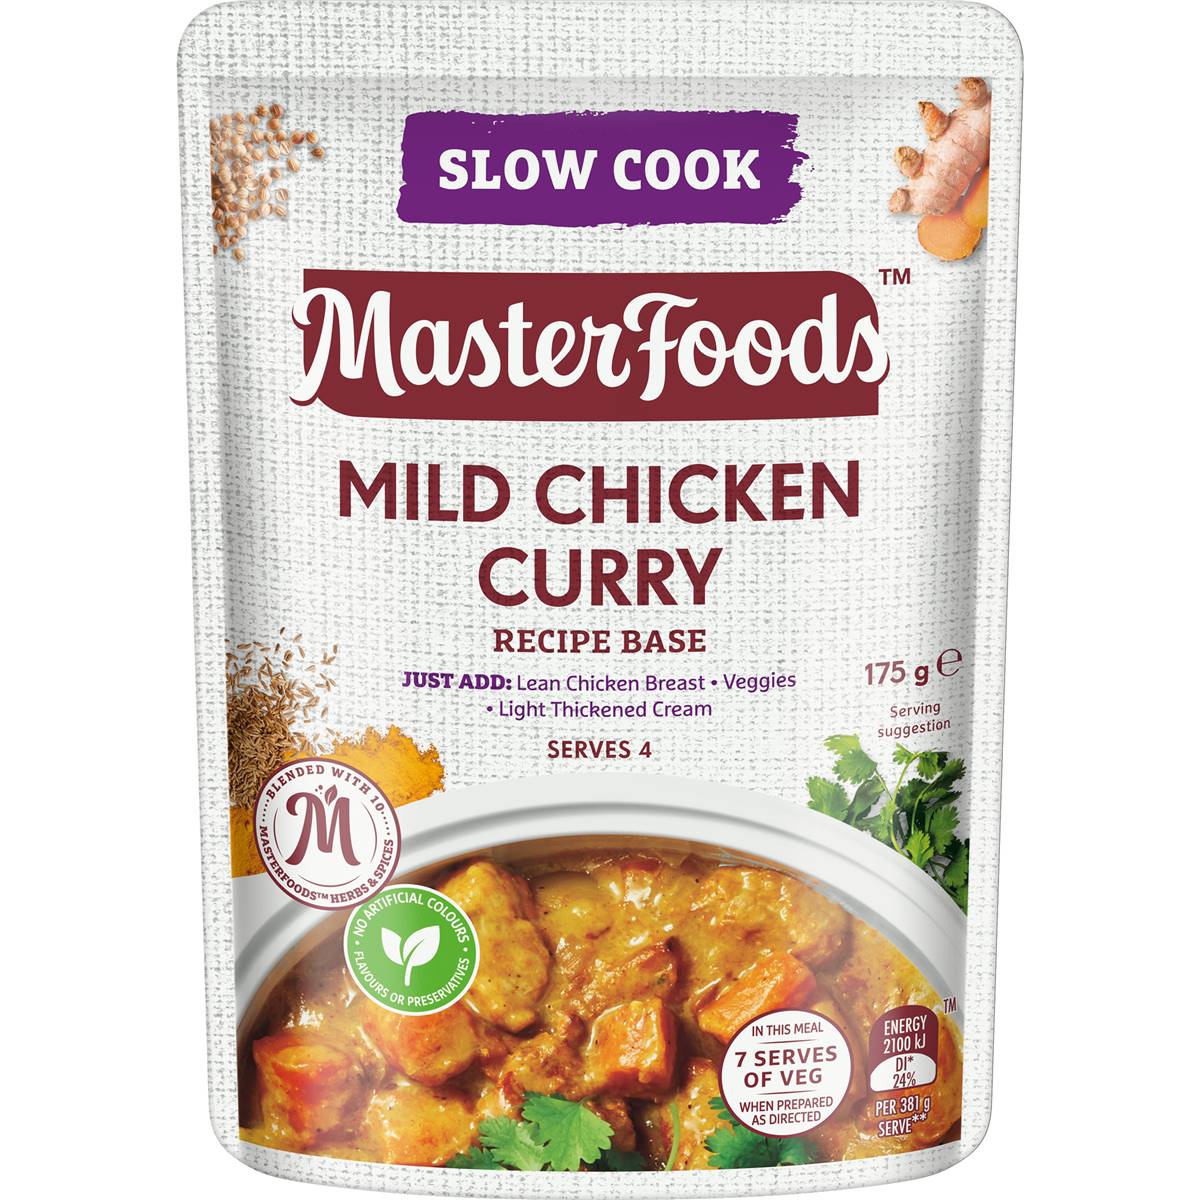 Masterfoods Slow Cooker Mild Chicken Curry